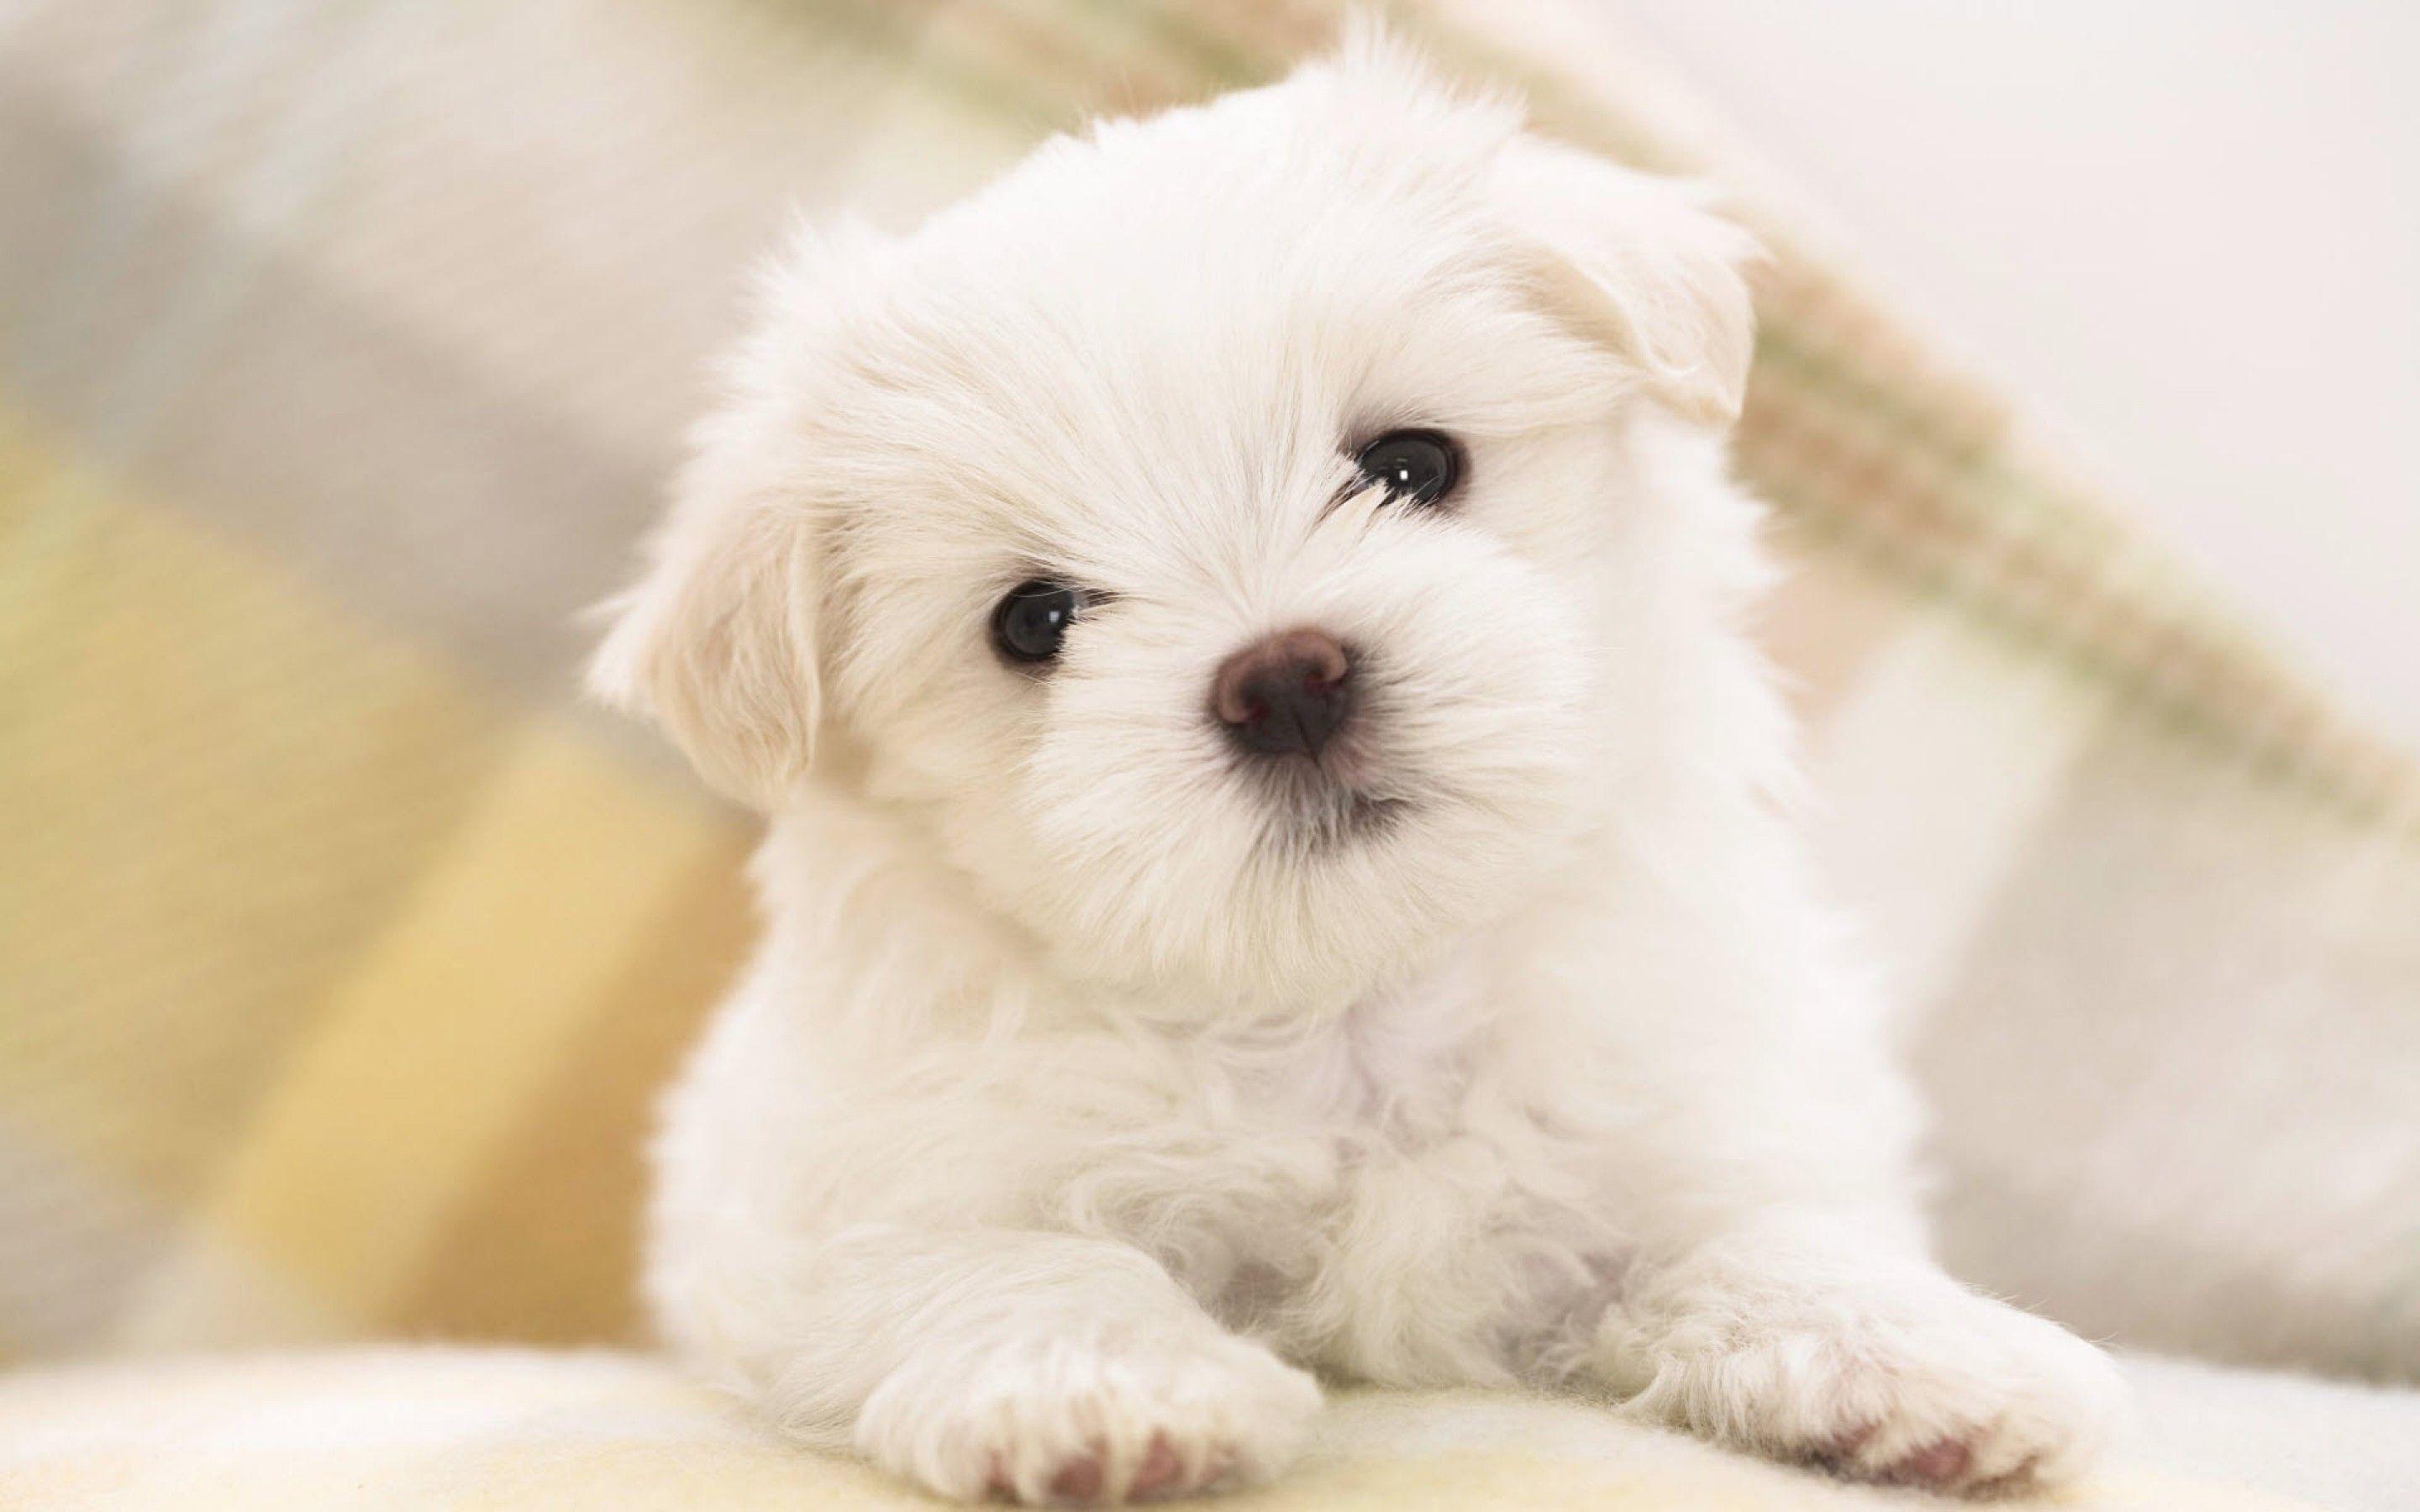 Wallpaper For > Wallpaper Of Cute Puppies